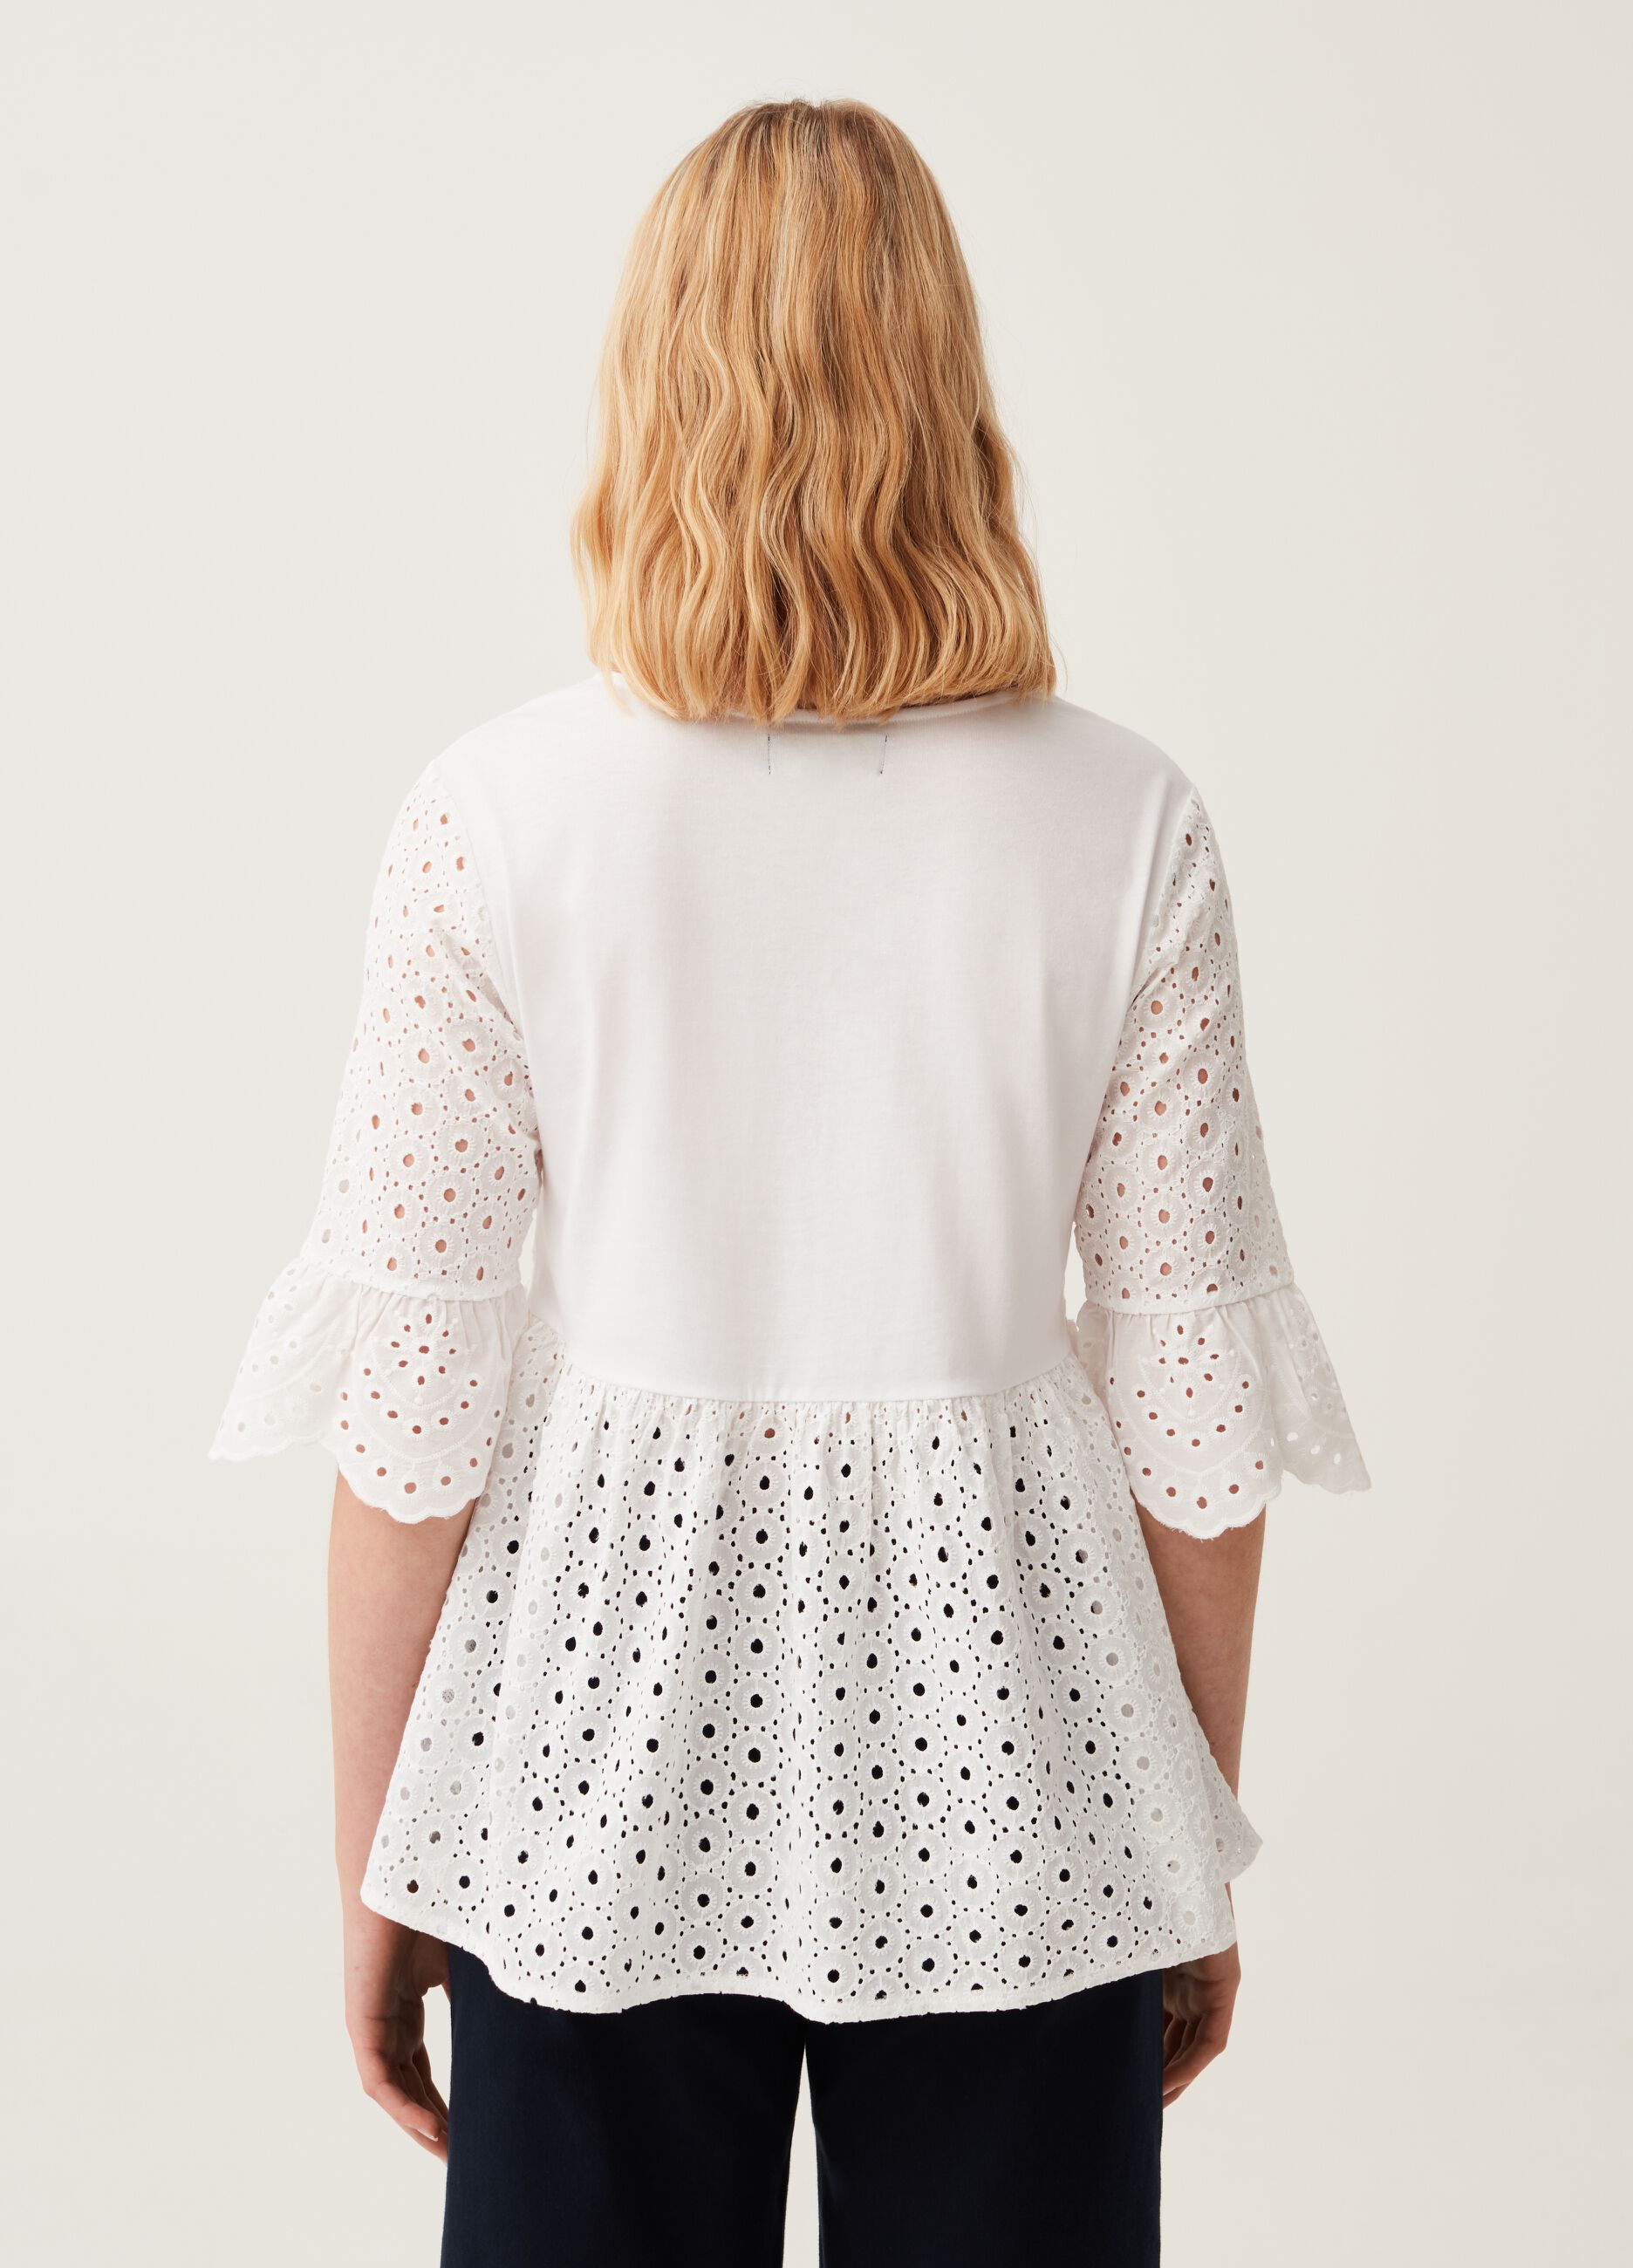 T-shirt in broderie anglaise lace with flounce